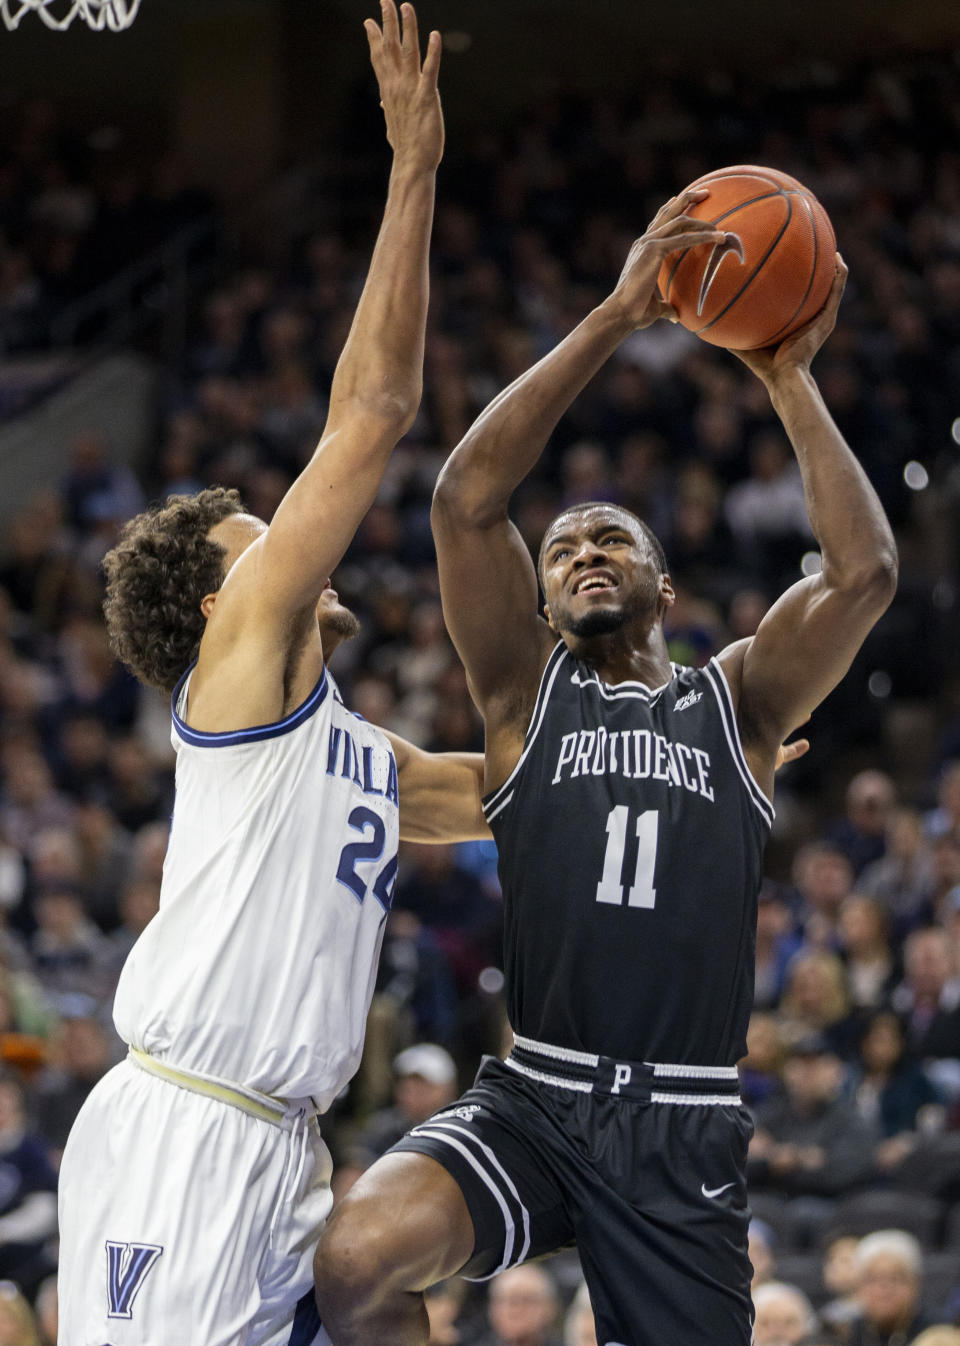 Providence guard Alpha Diallo (11) takes a shot over Villanova forward Jeremiah Robinson-Earl (24) during the second half of an NCAA college basketball game, Saturday, Feb. 29, 2020, in Philadelphia, Pa. Providence won 58-54. (AP Photo/Laurence Kesterson)